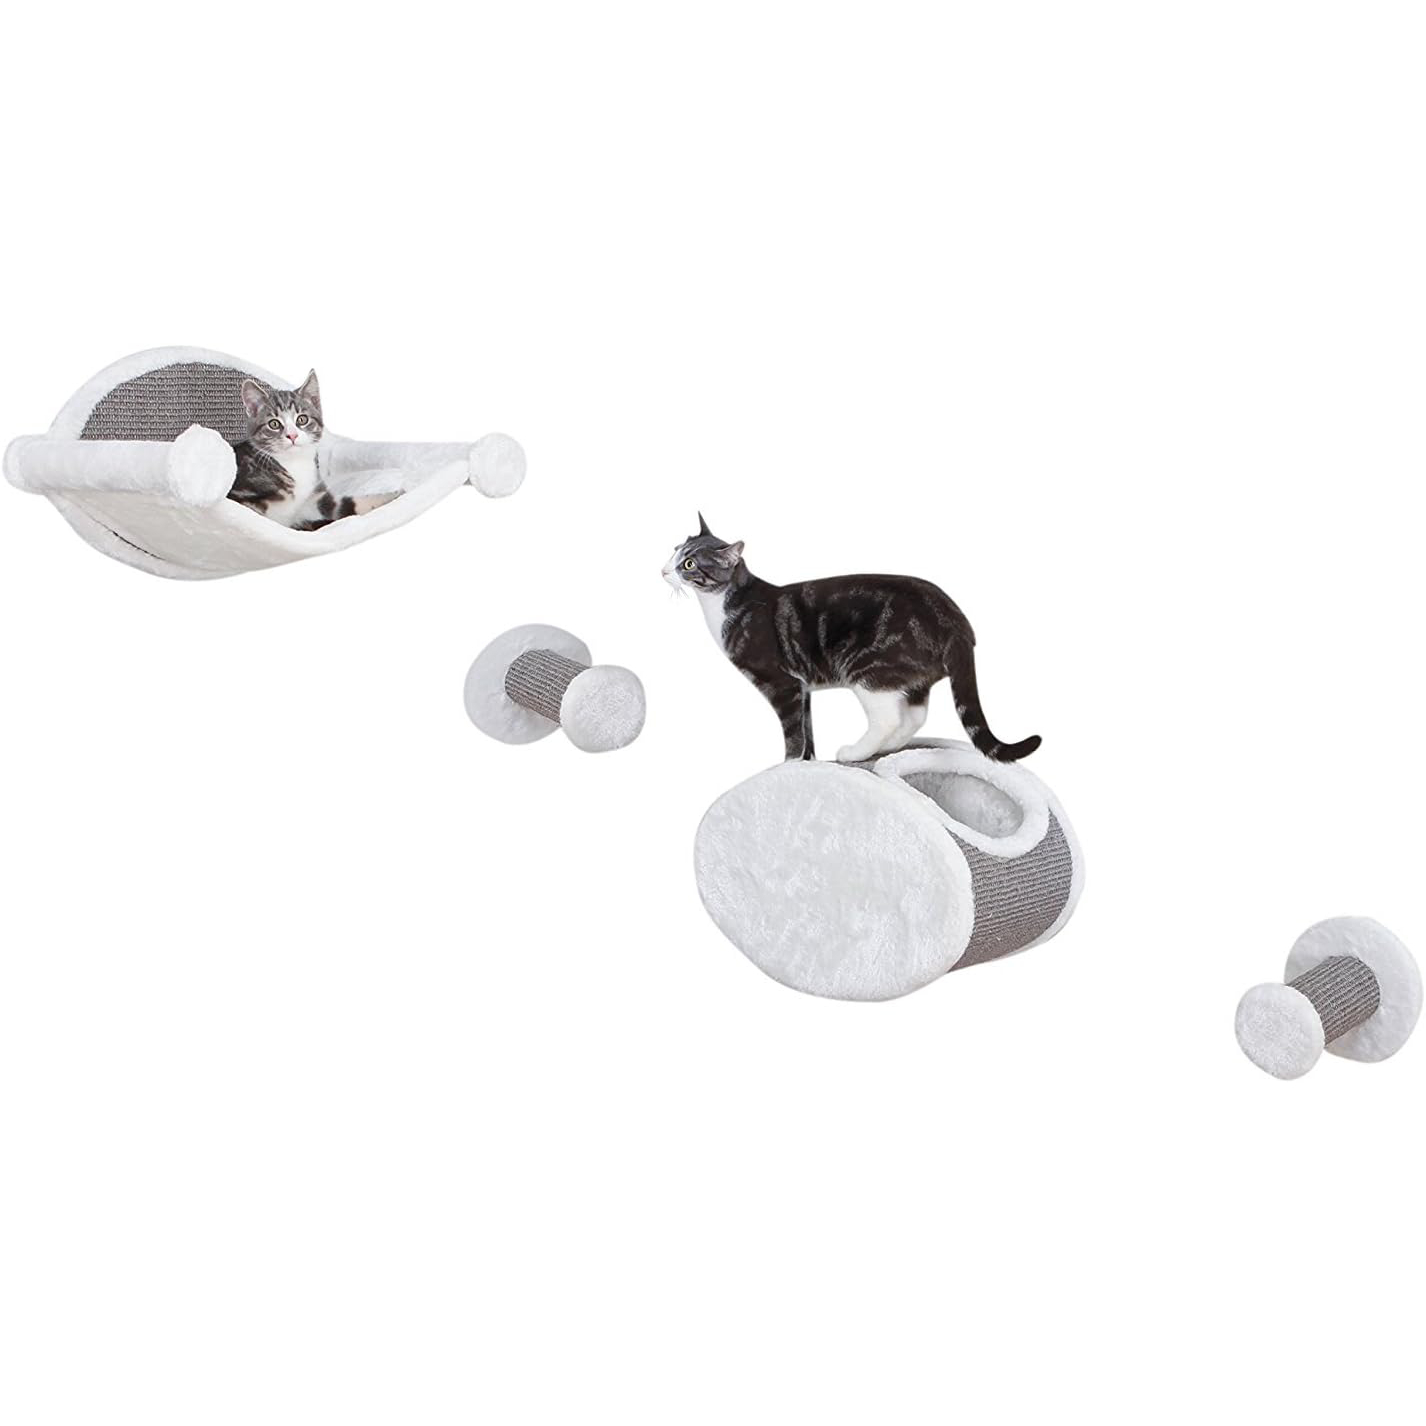 TRIXIE Wall Mounted Cat Lounge Set, Hammock and Condo with Two Steps, Cat Furniture, Scratching Post, Gray New